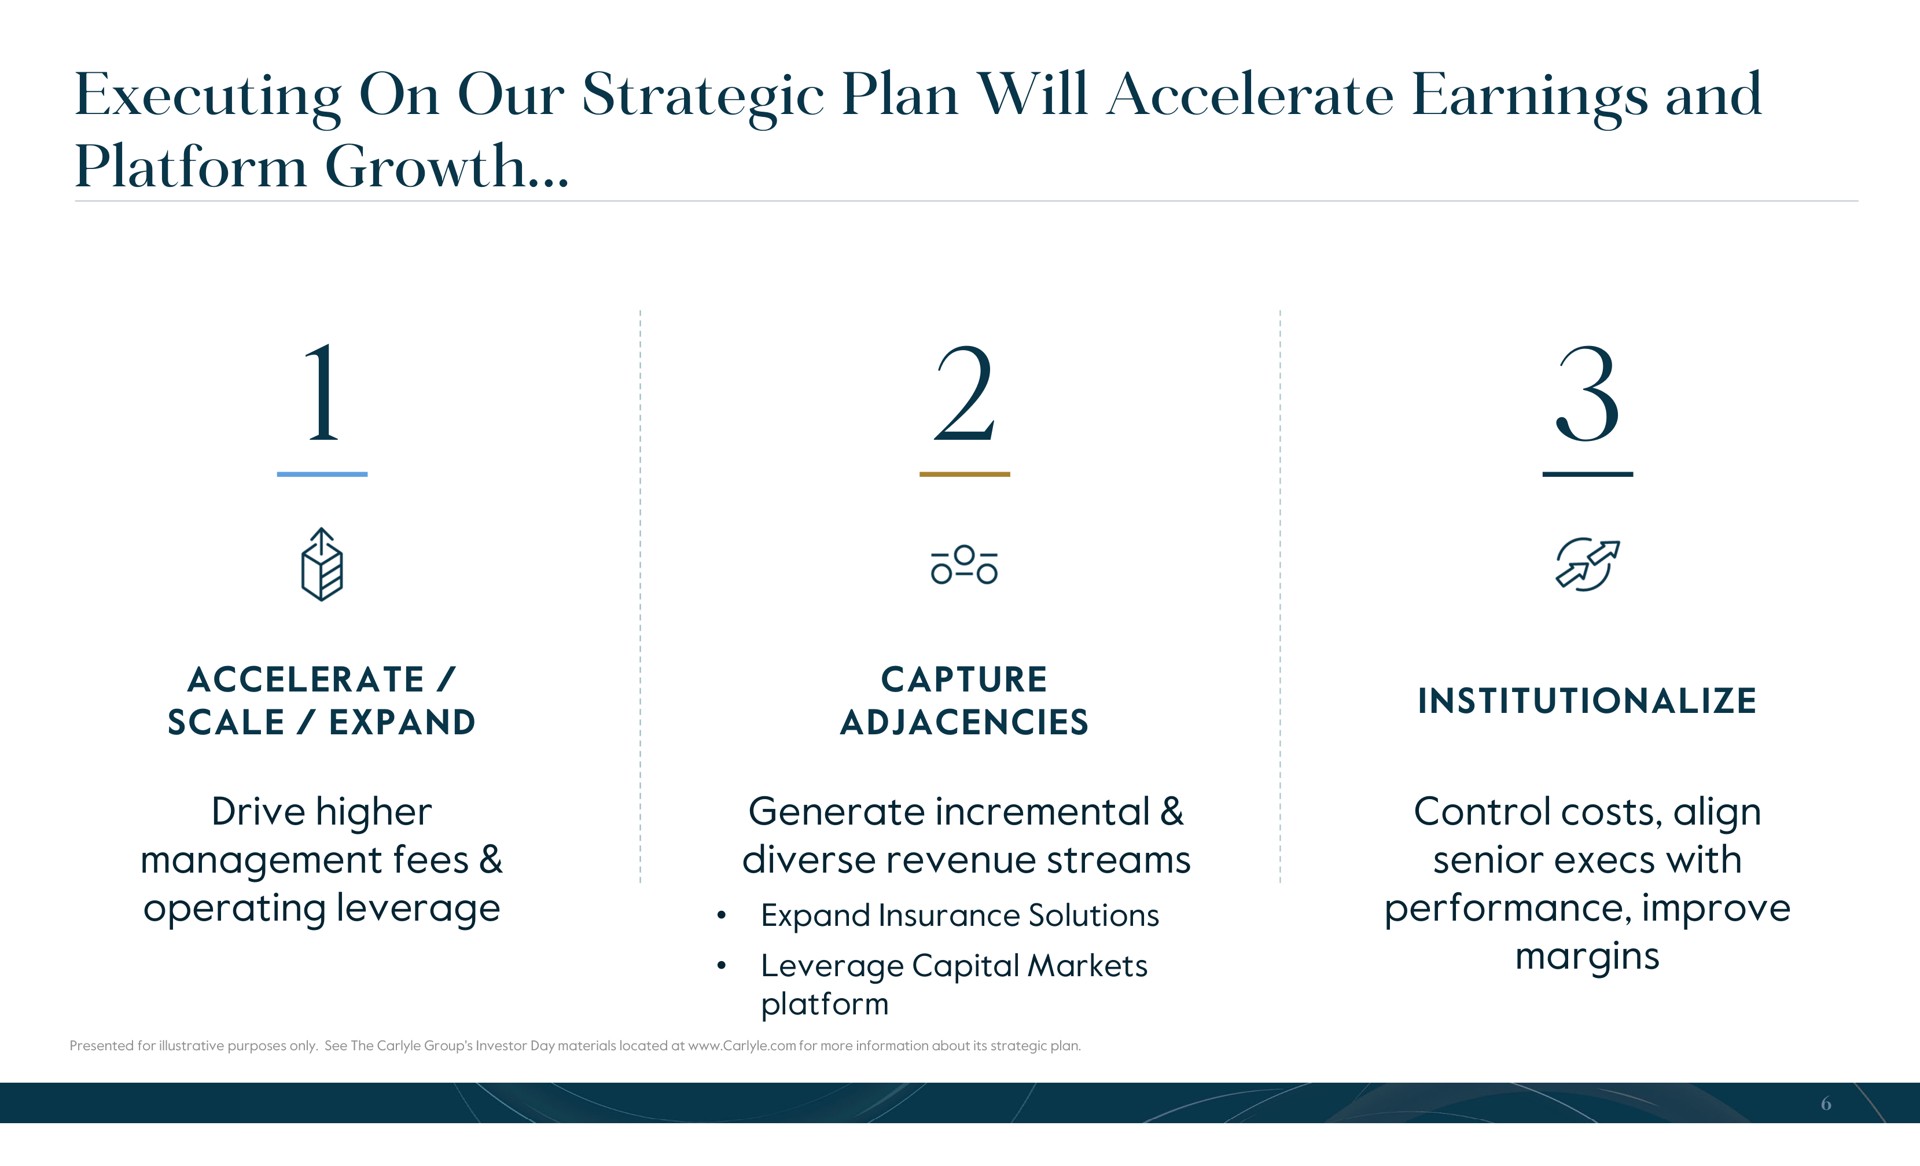 executing on our strategic plan will accelerate earnings and platform growth | Carlyle